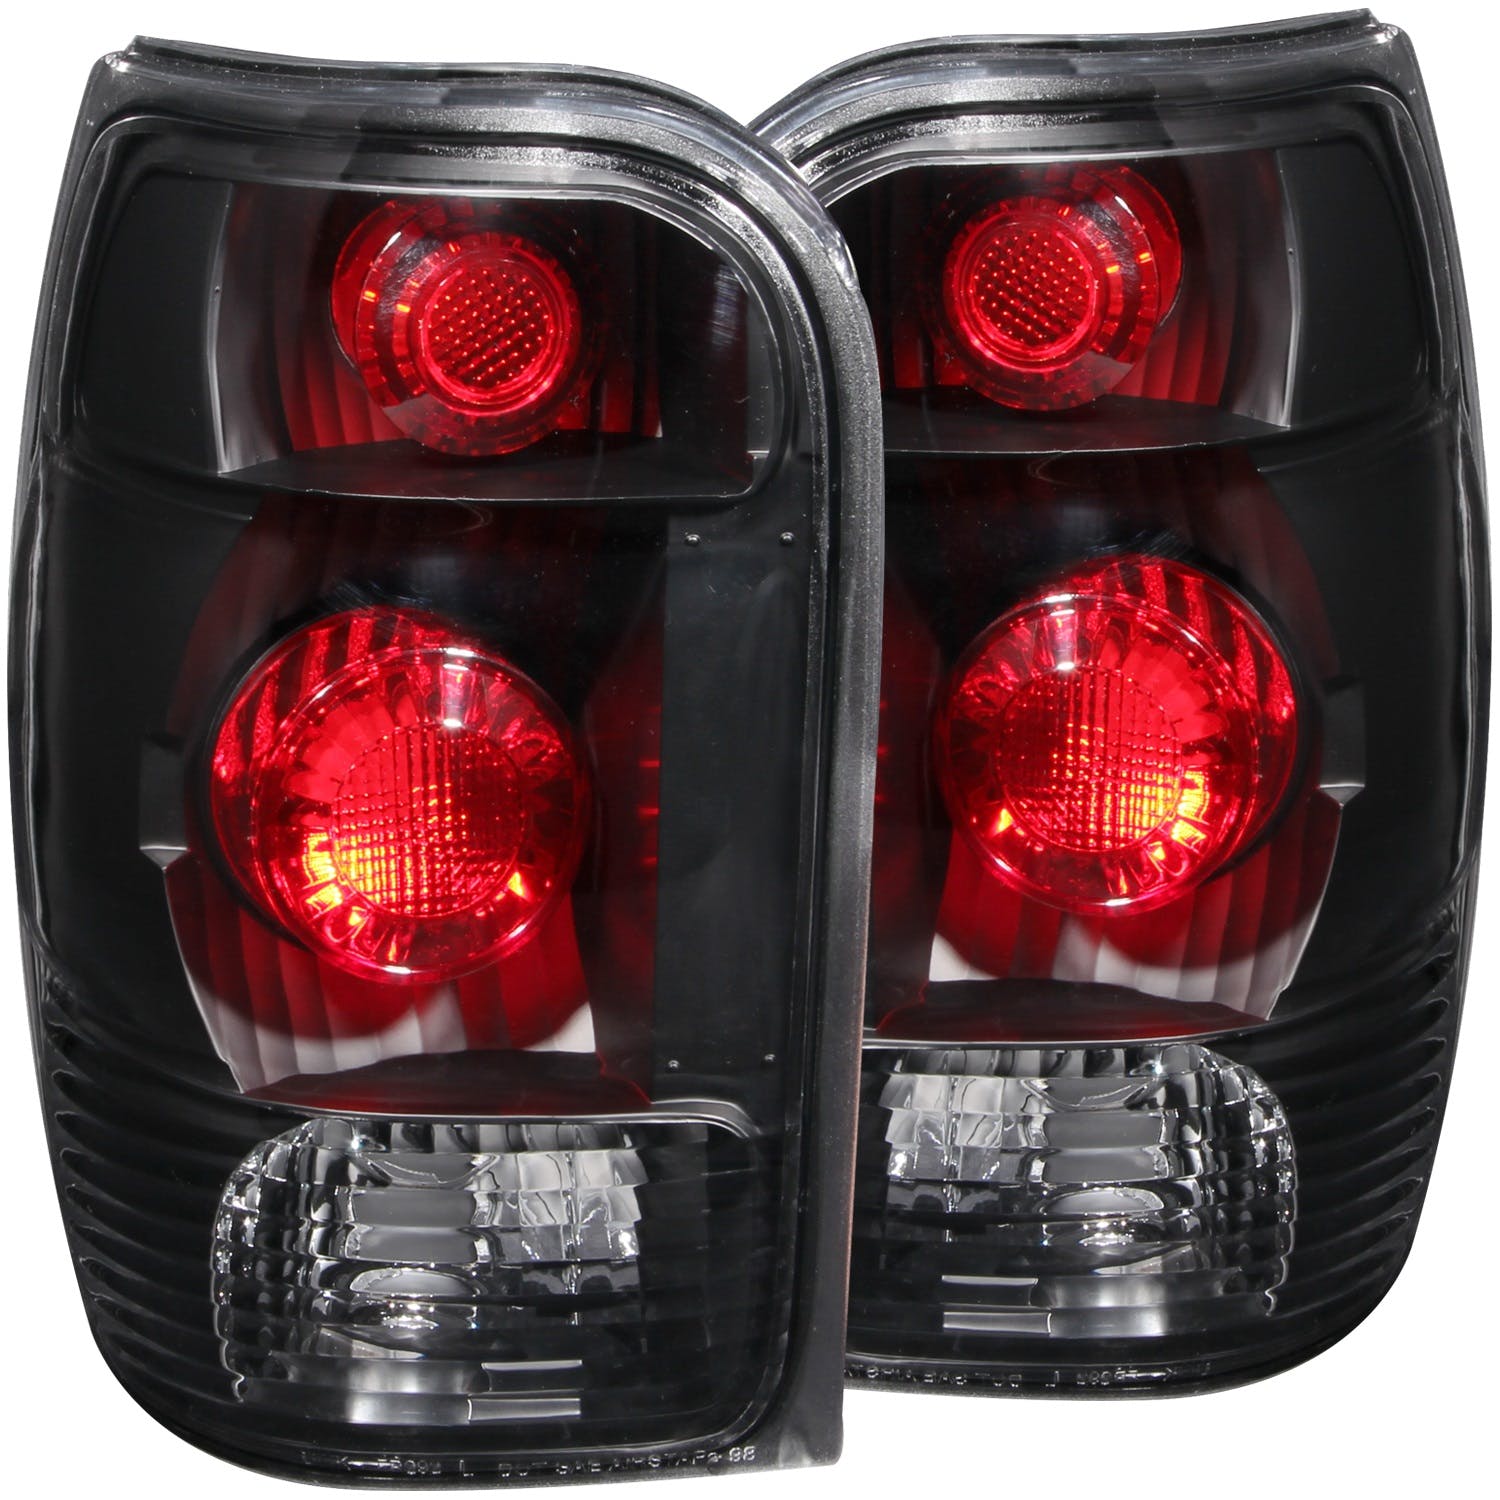 AnzoUSA 211084 Taillights Black